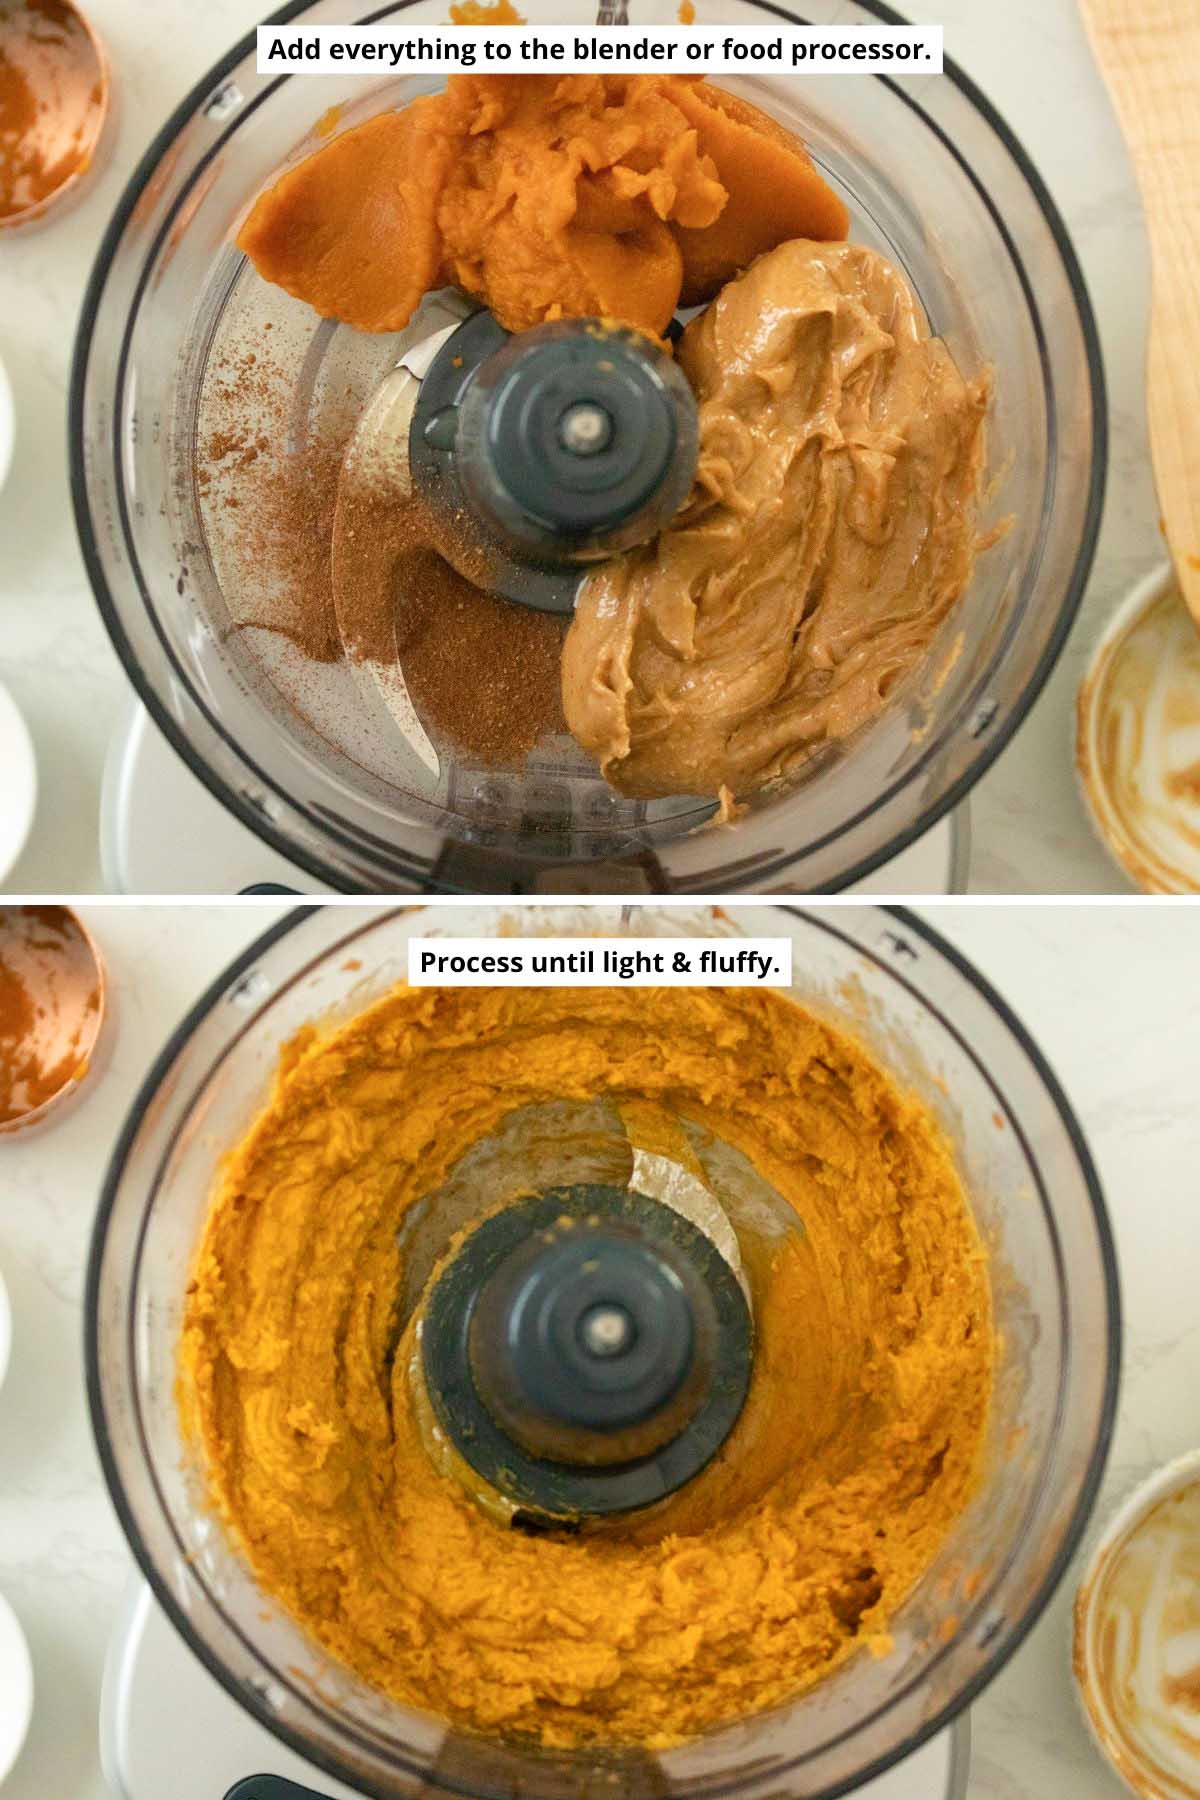 pumpkin spice almond butter ingredients in the food processor before and after processing